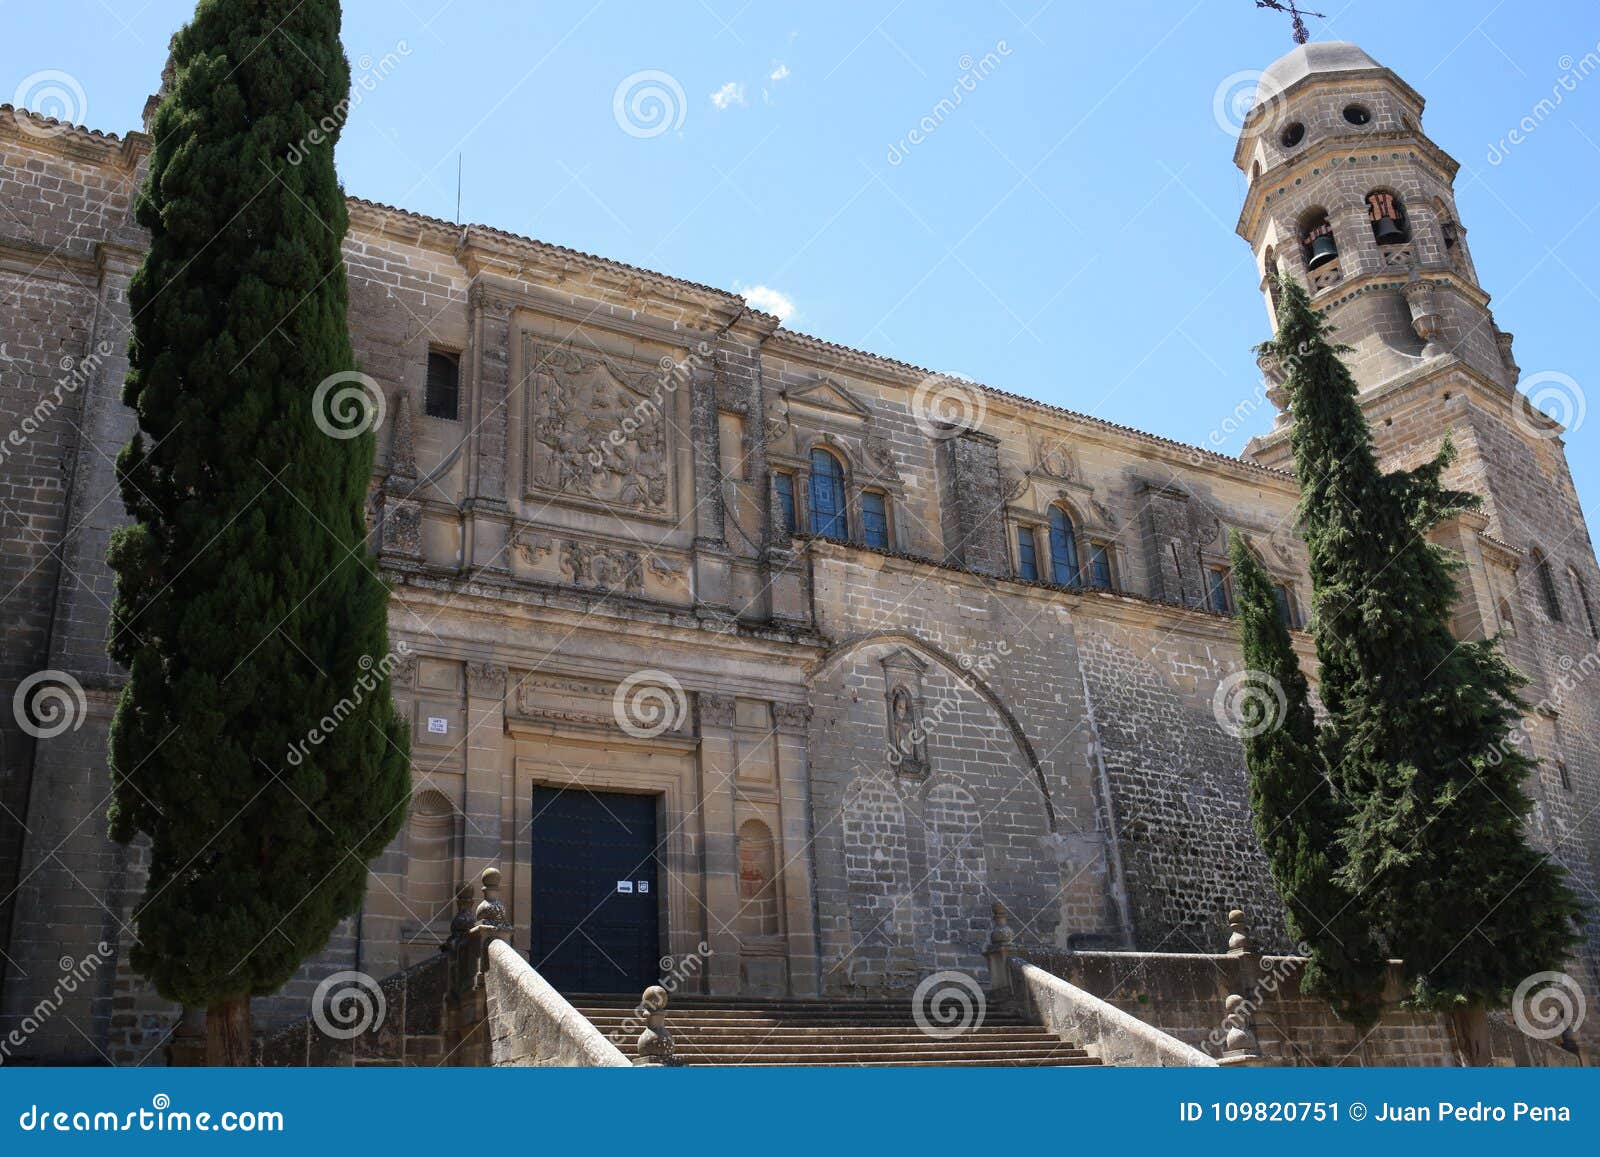 cathedrale of baeza, andalusian, spain